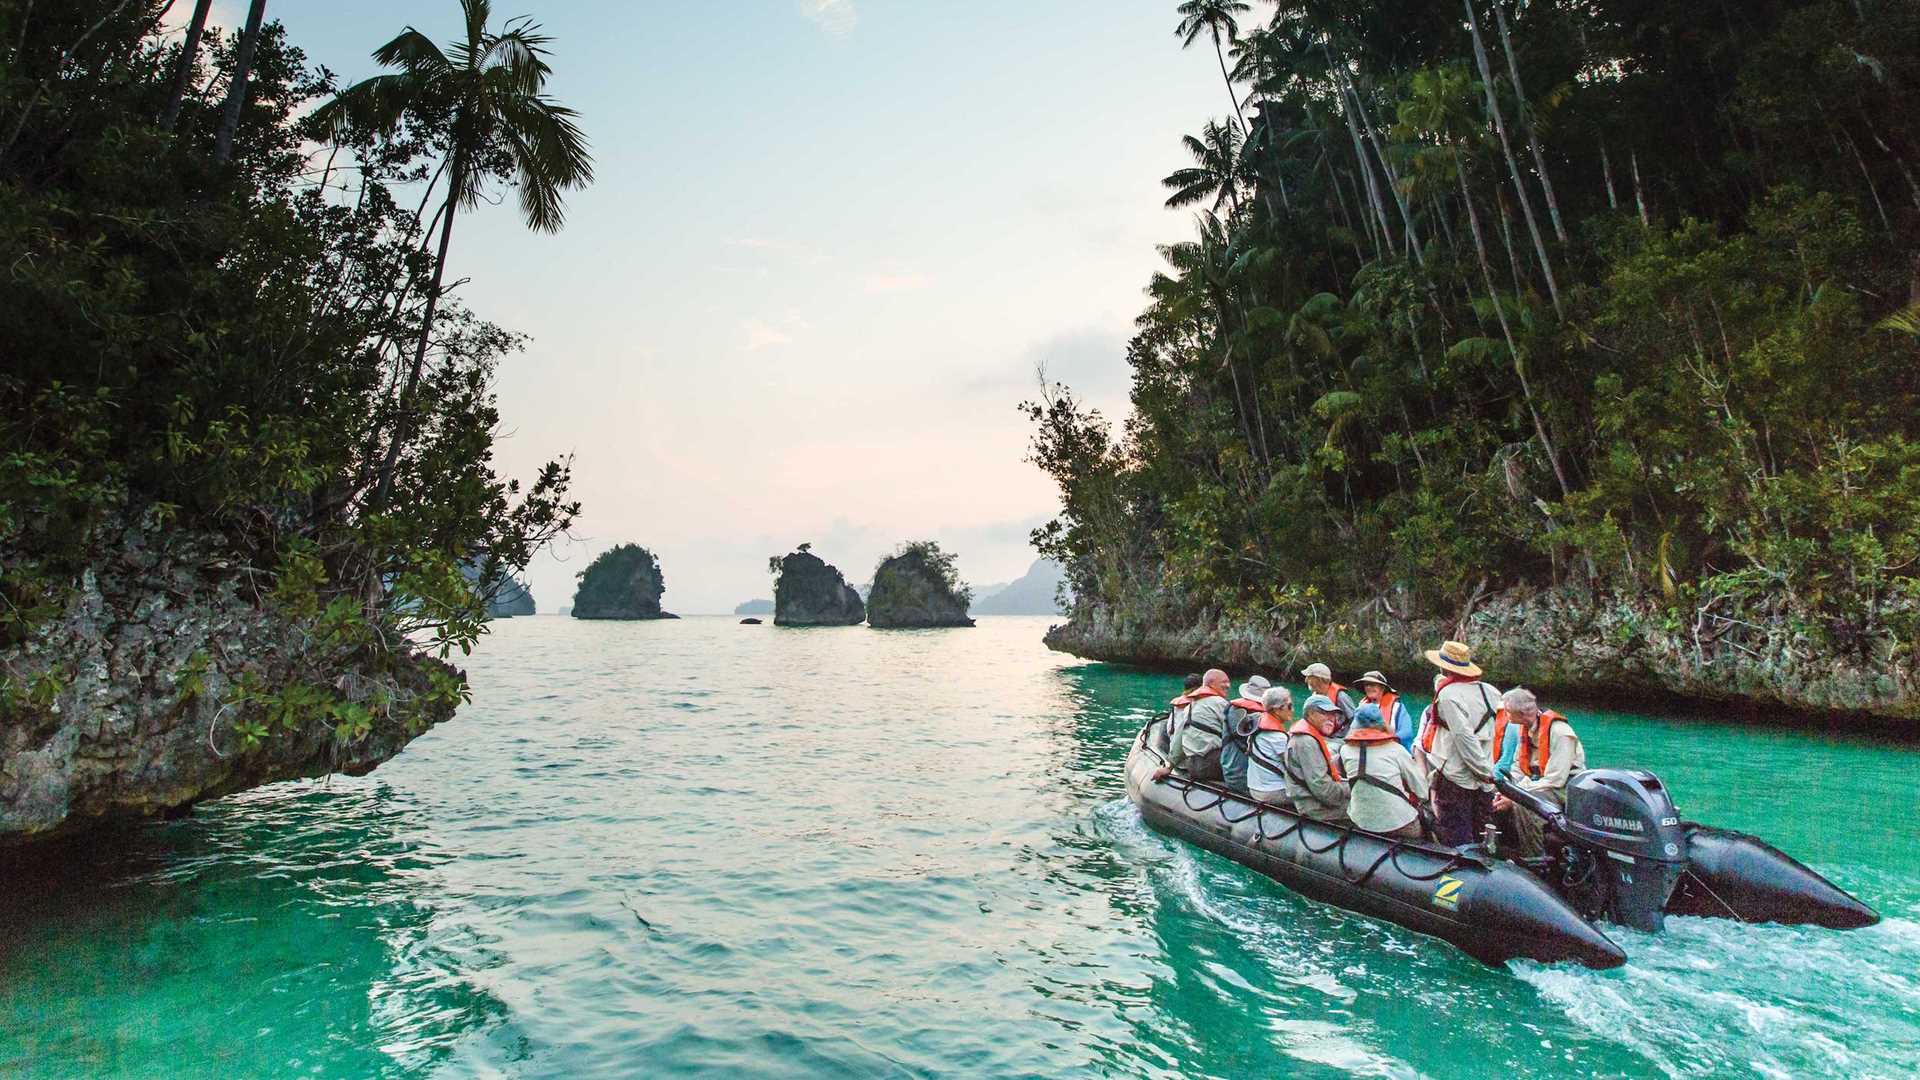 A Zodiac boat cruises through the emerald green waters of Indonesia